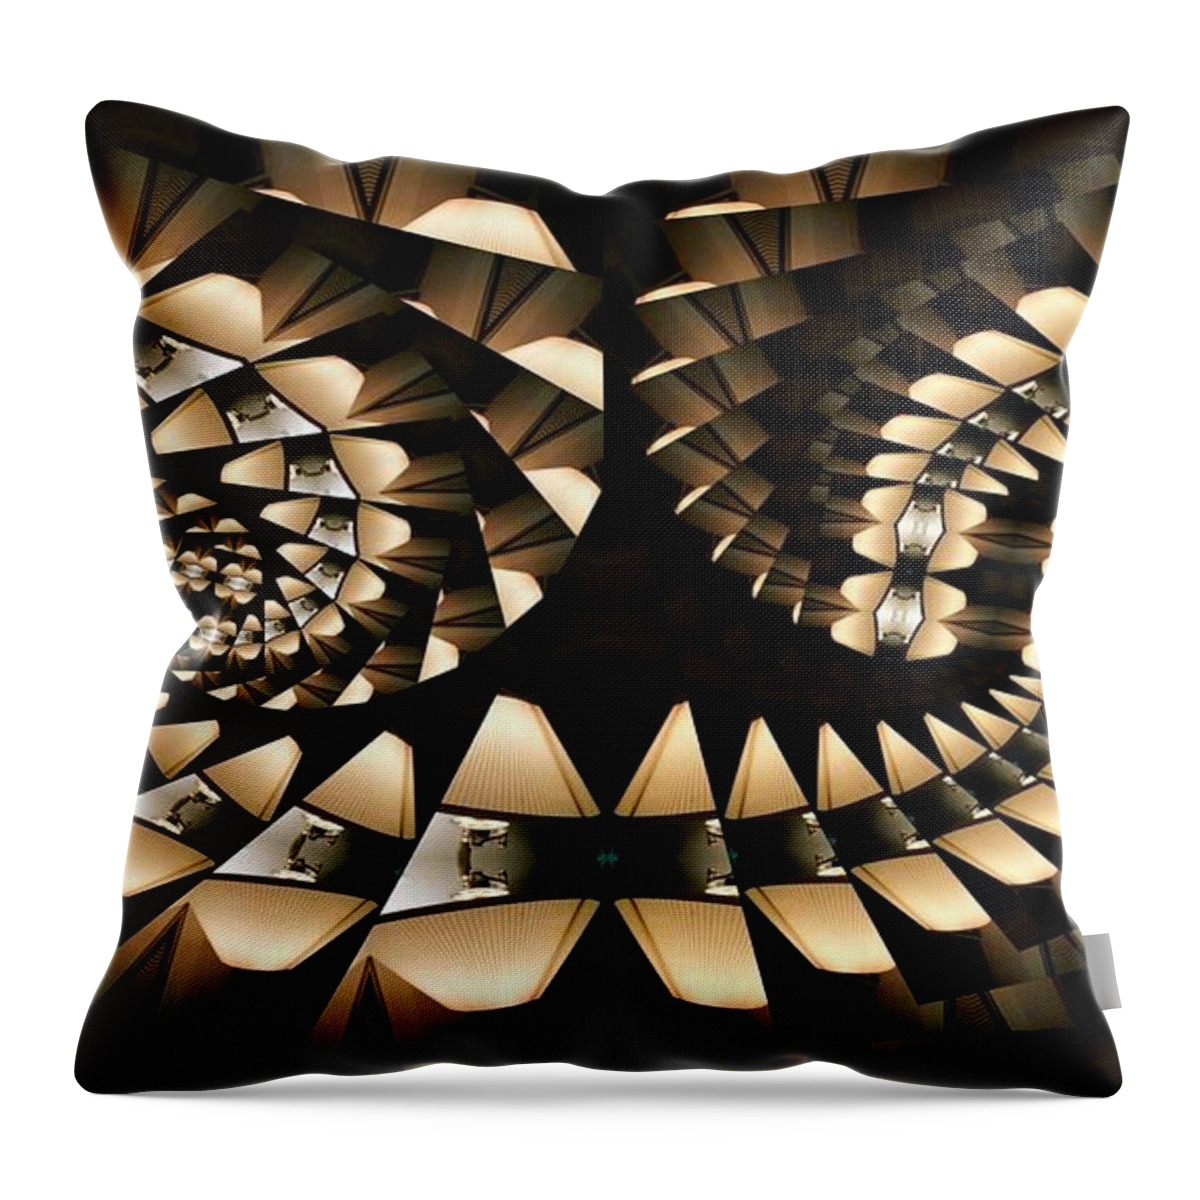 Collage Throw Pillow featuring the digital art Tangential Spiral by Ronald Bissett